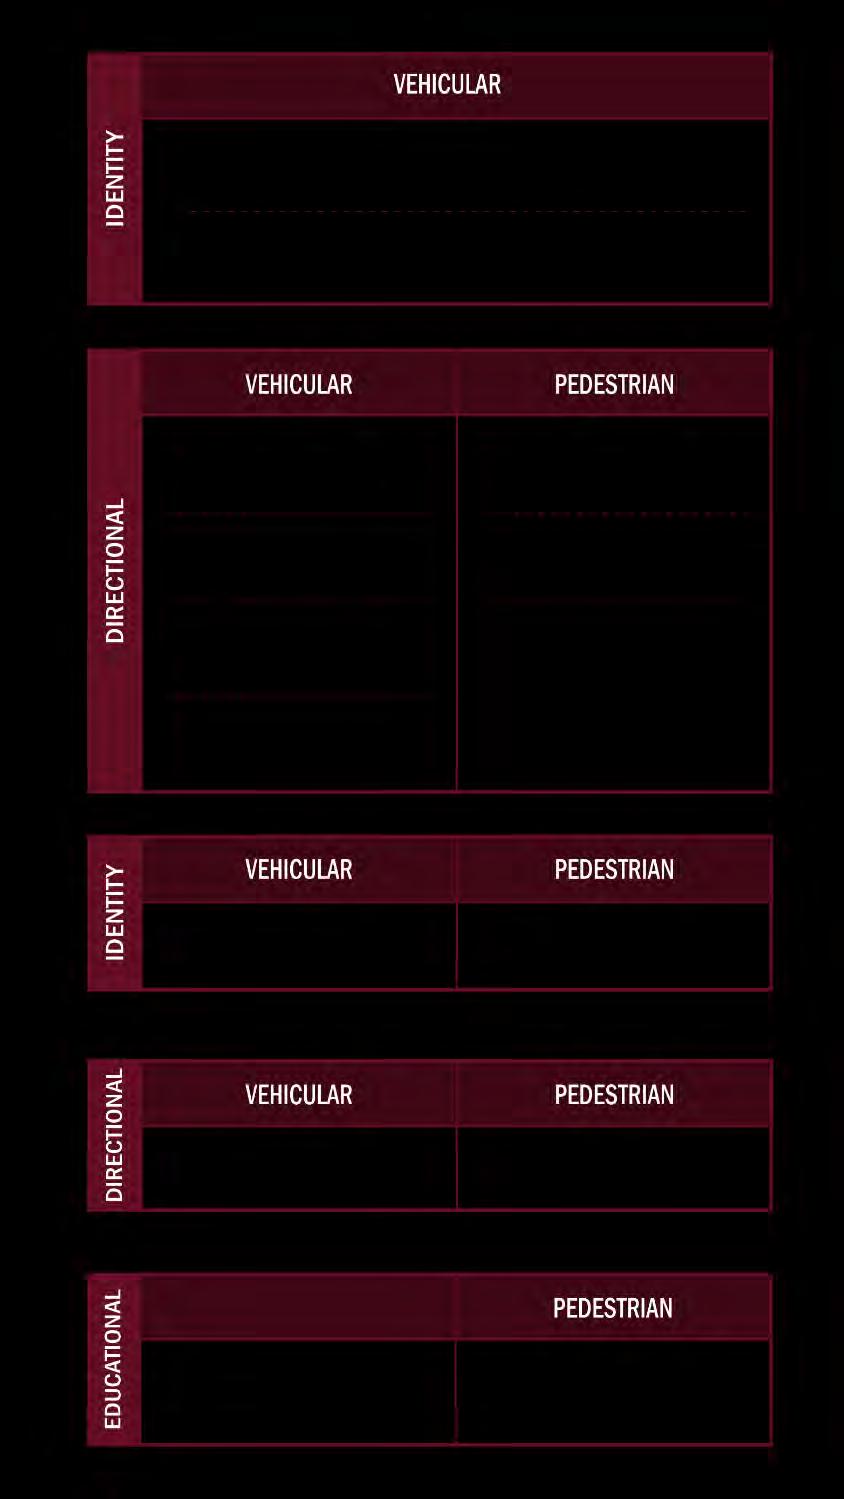 concepts: Hierarchy Schematic Design Sign Types Primary Vehicular